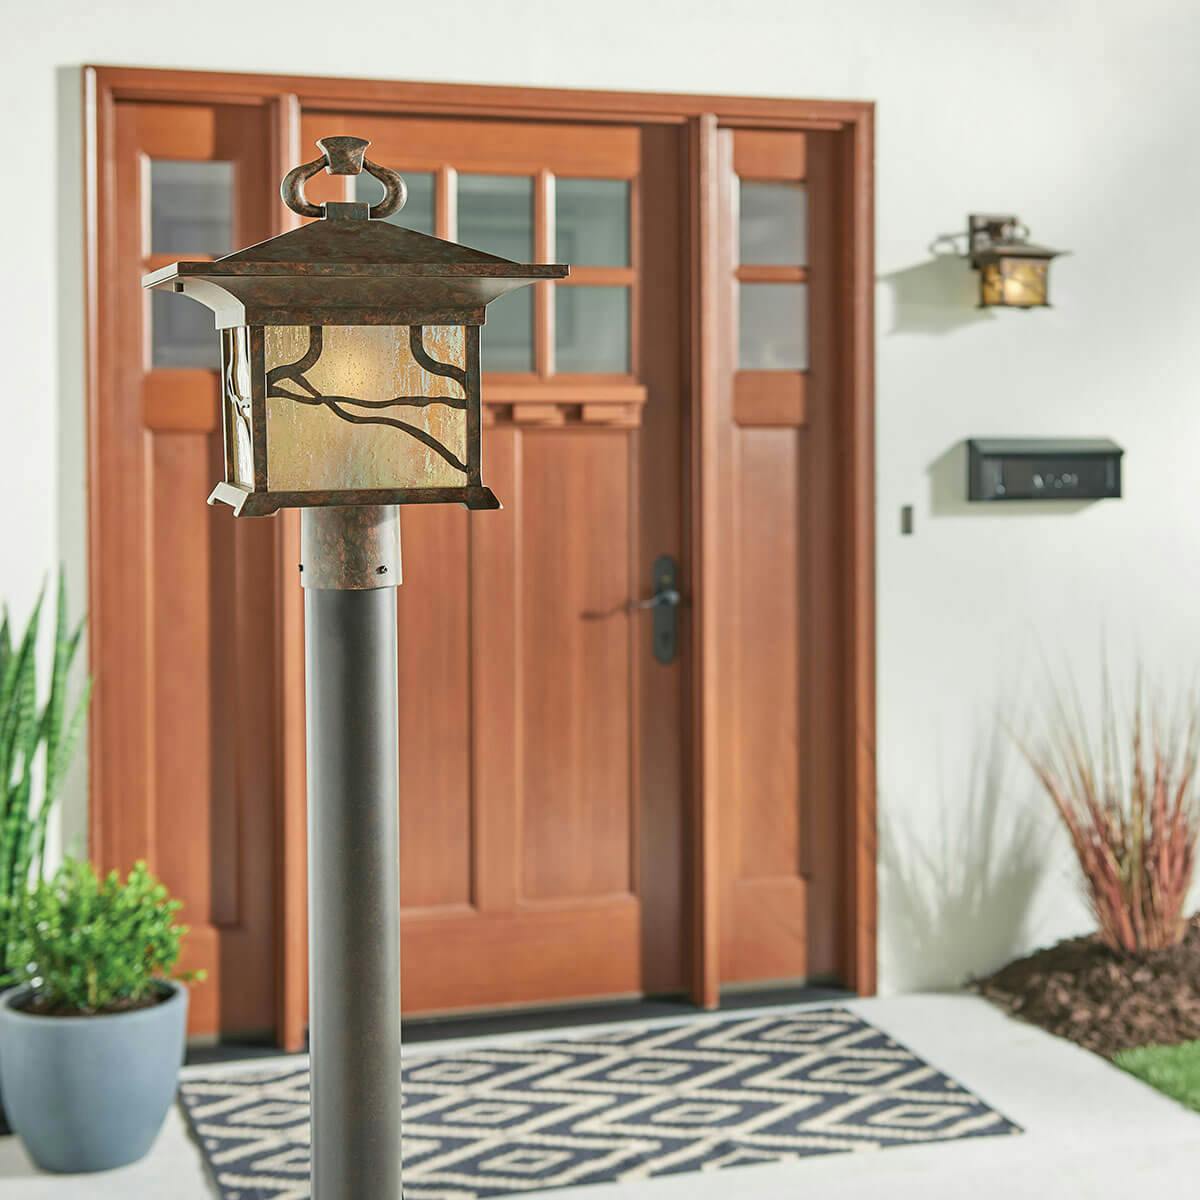 Day time outdoor entryway featuring Morris 9929DCO